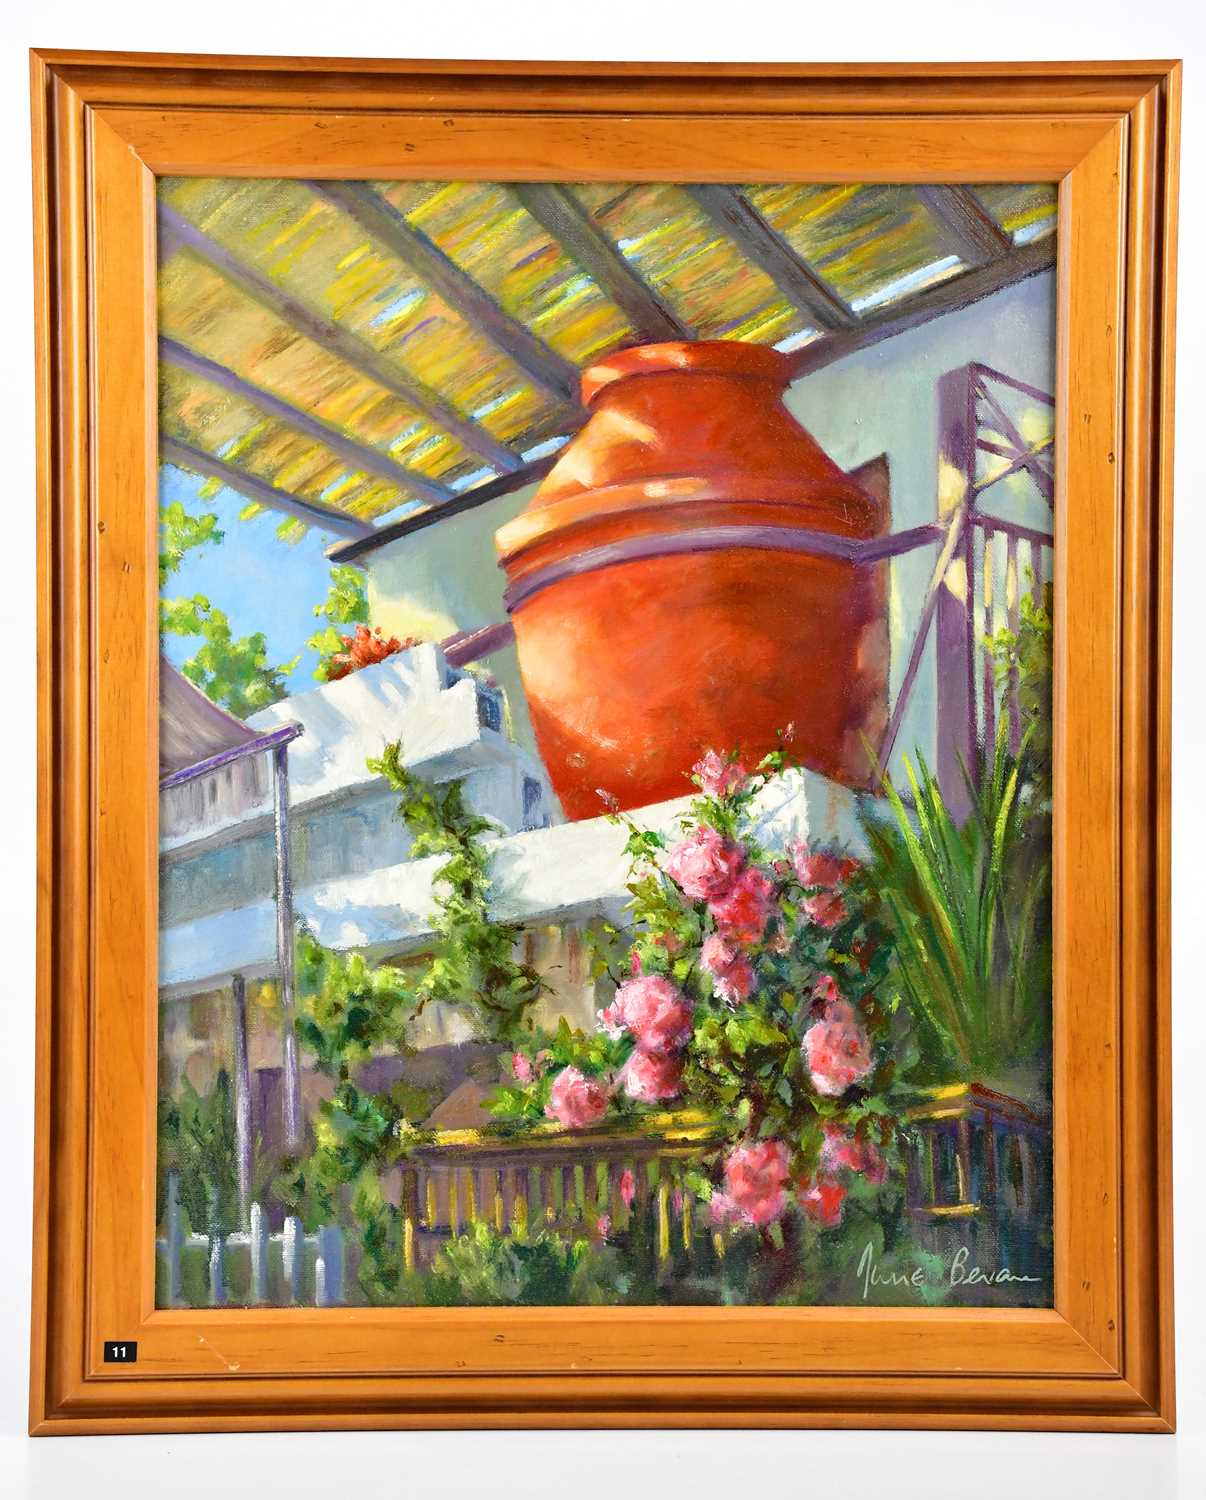 † JUNE BEVAN; oil on canvas, 'Grecian Urn', signed lower right, 50 x 40cm, framed.